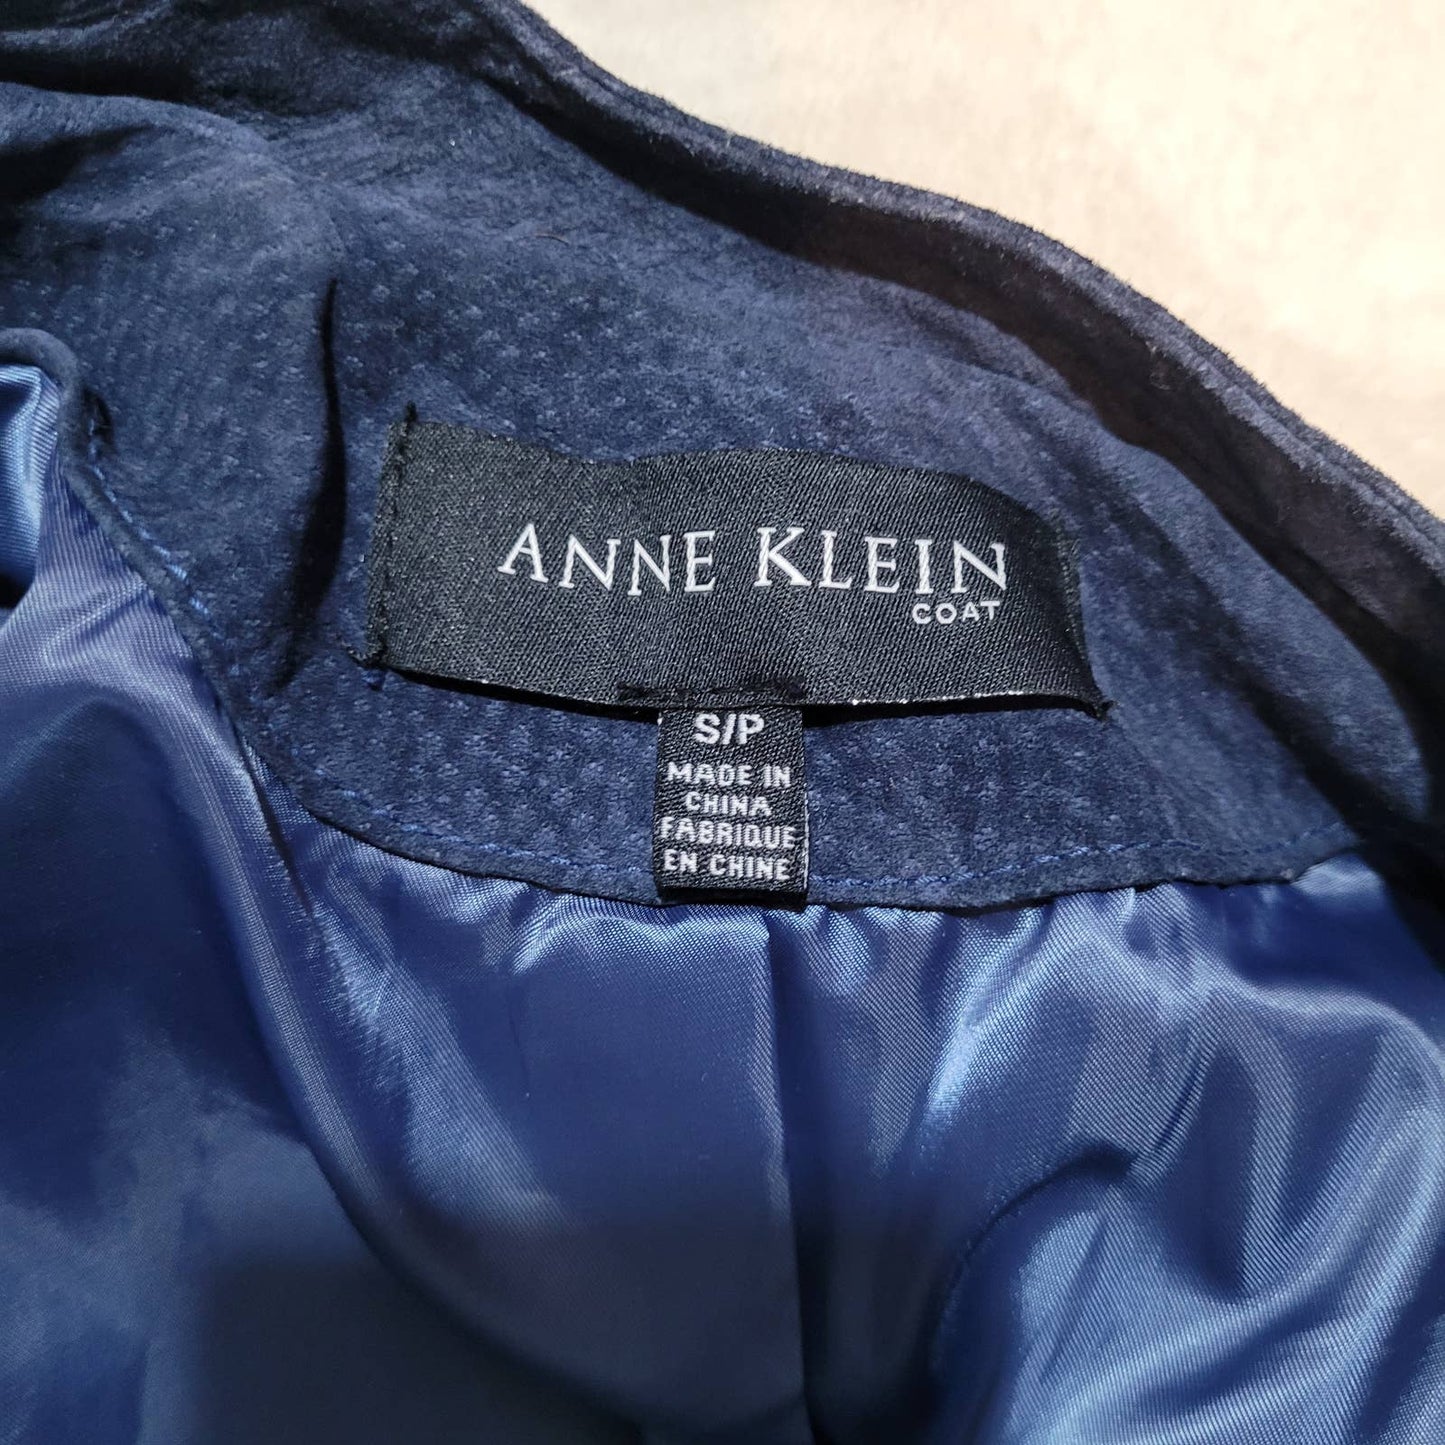 Anne Klein Blue Suede Leather Jacket - Size Small